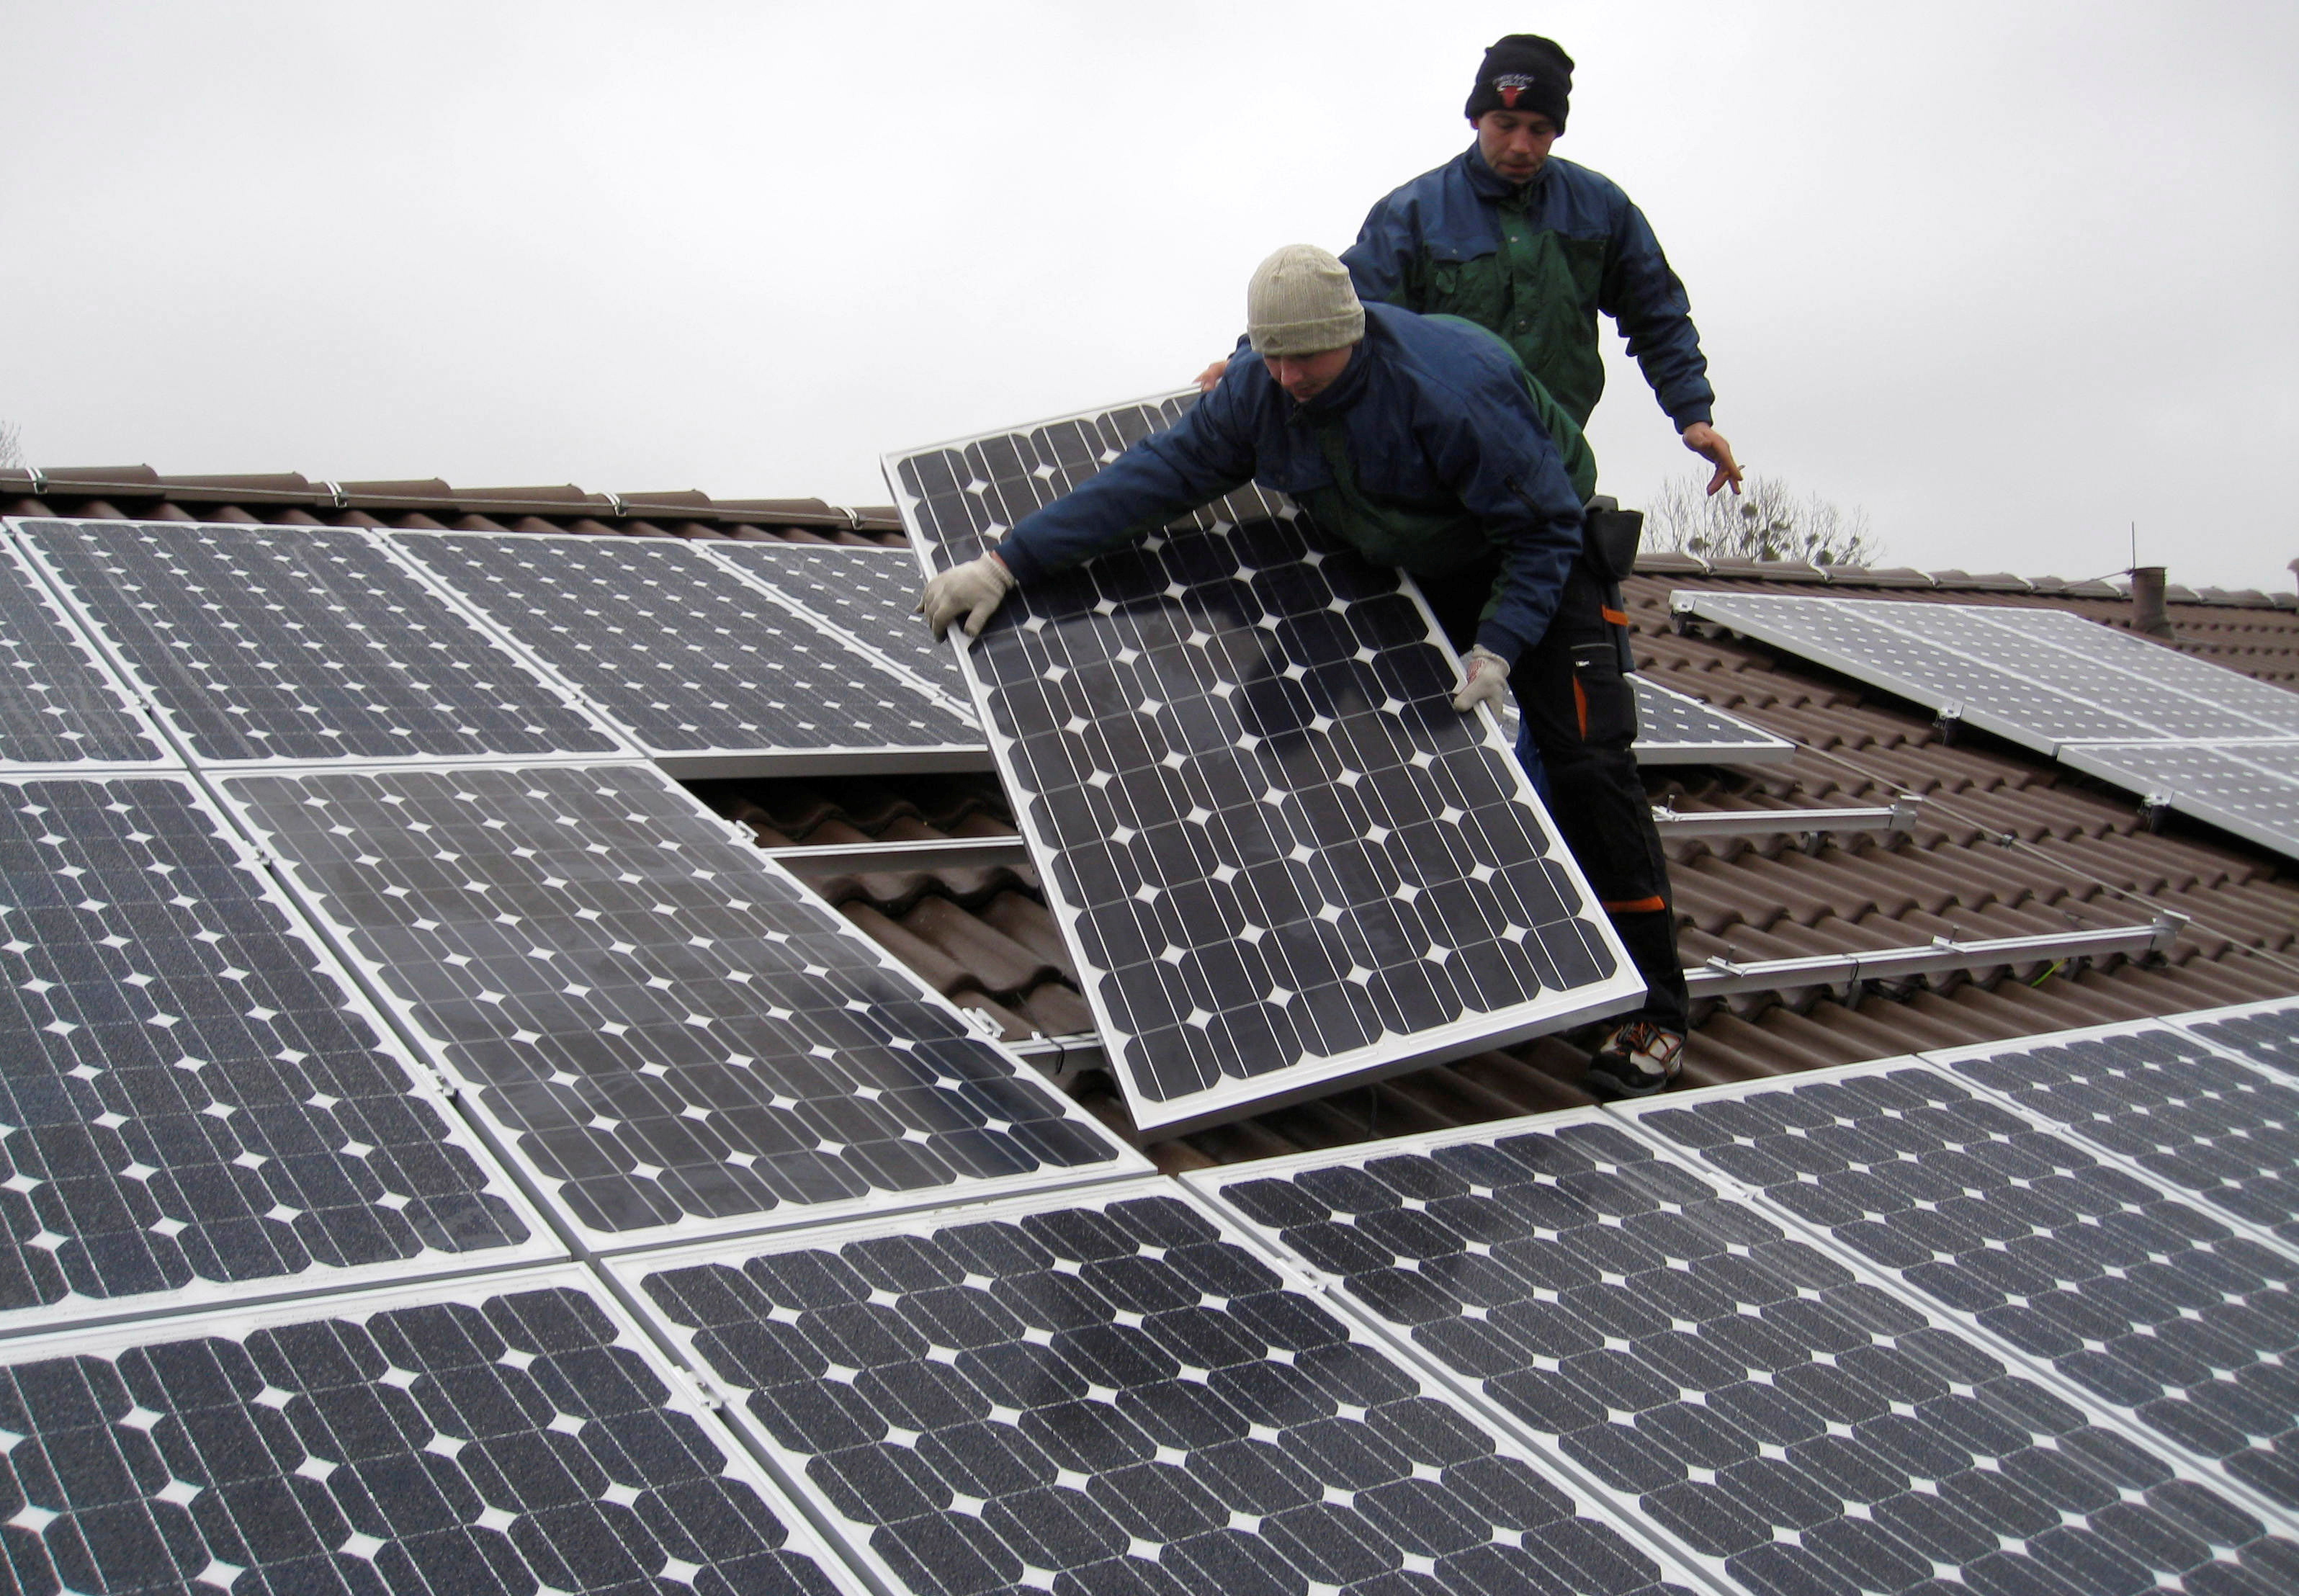 Workers install solar panels on a roof near Berlin